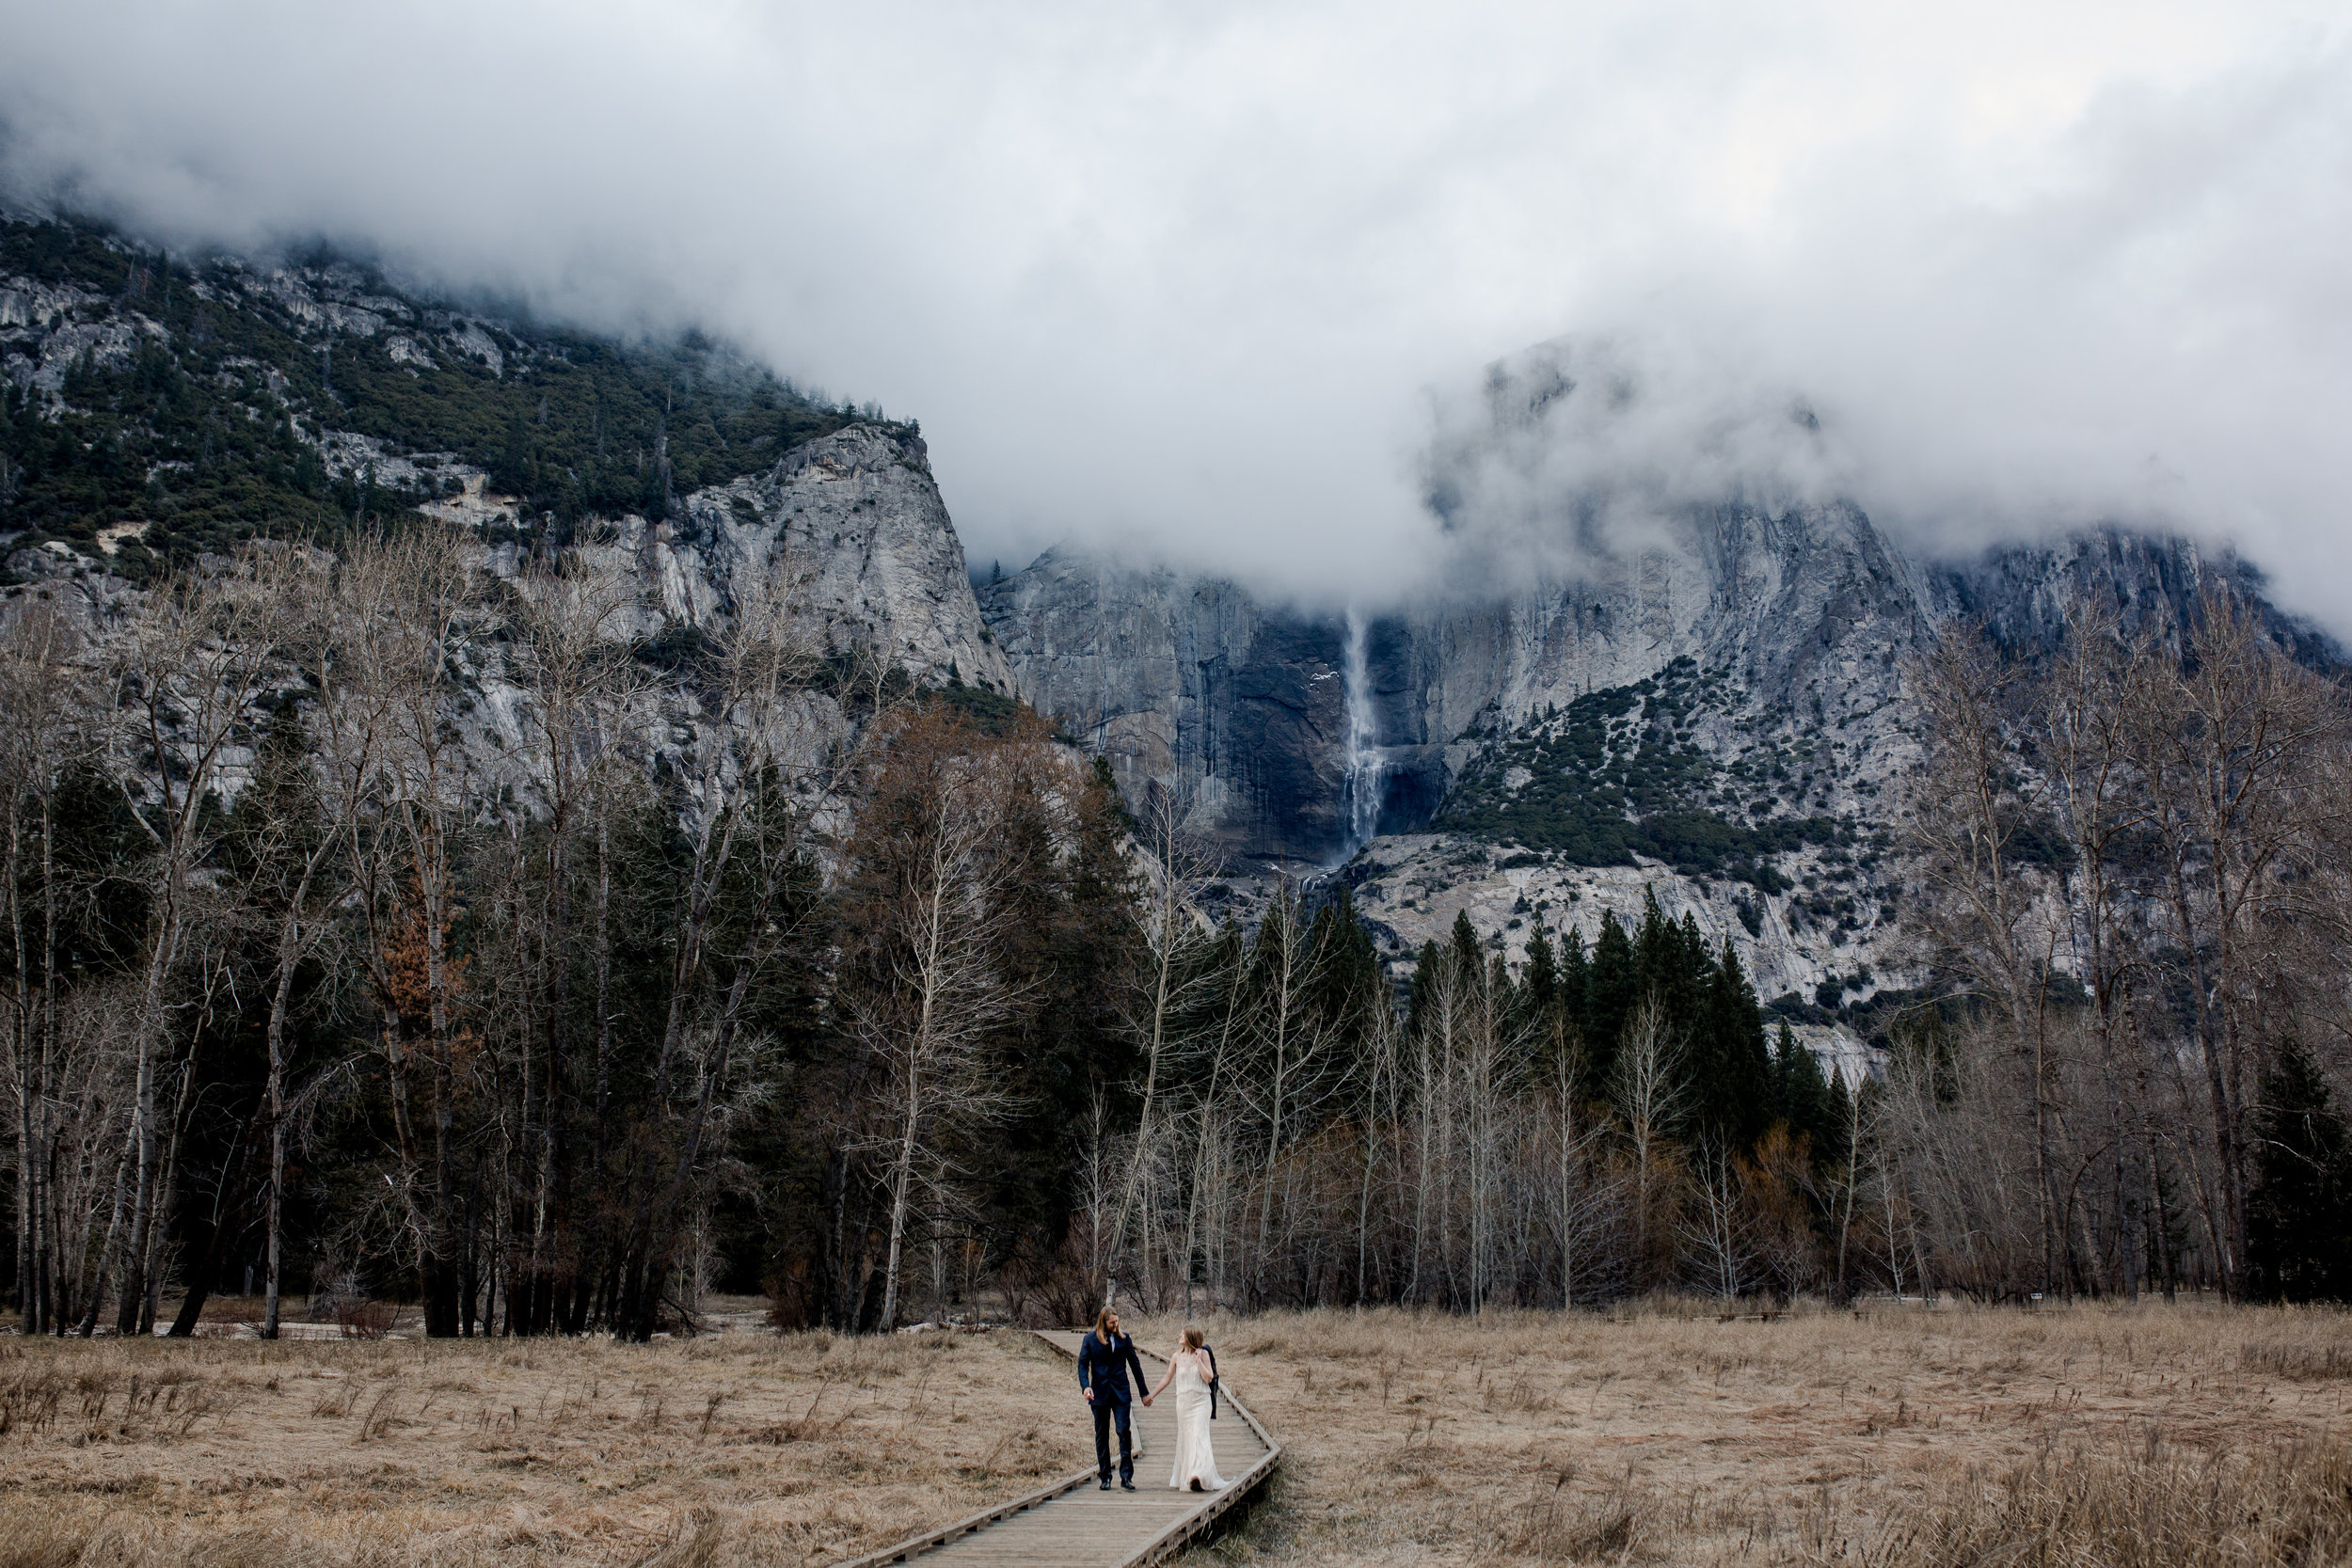 nicole-daacke-photography-yousemite-national-park-elopement-photographer-winter-cloud-moody-elope-inspiration-yosemite-valley-tunnel-view-winter-cloud-fog-weather-wedding-photos-92.jpg